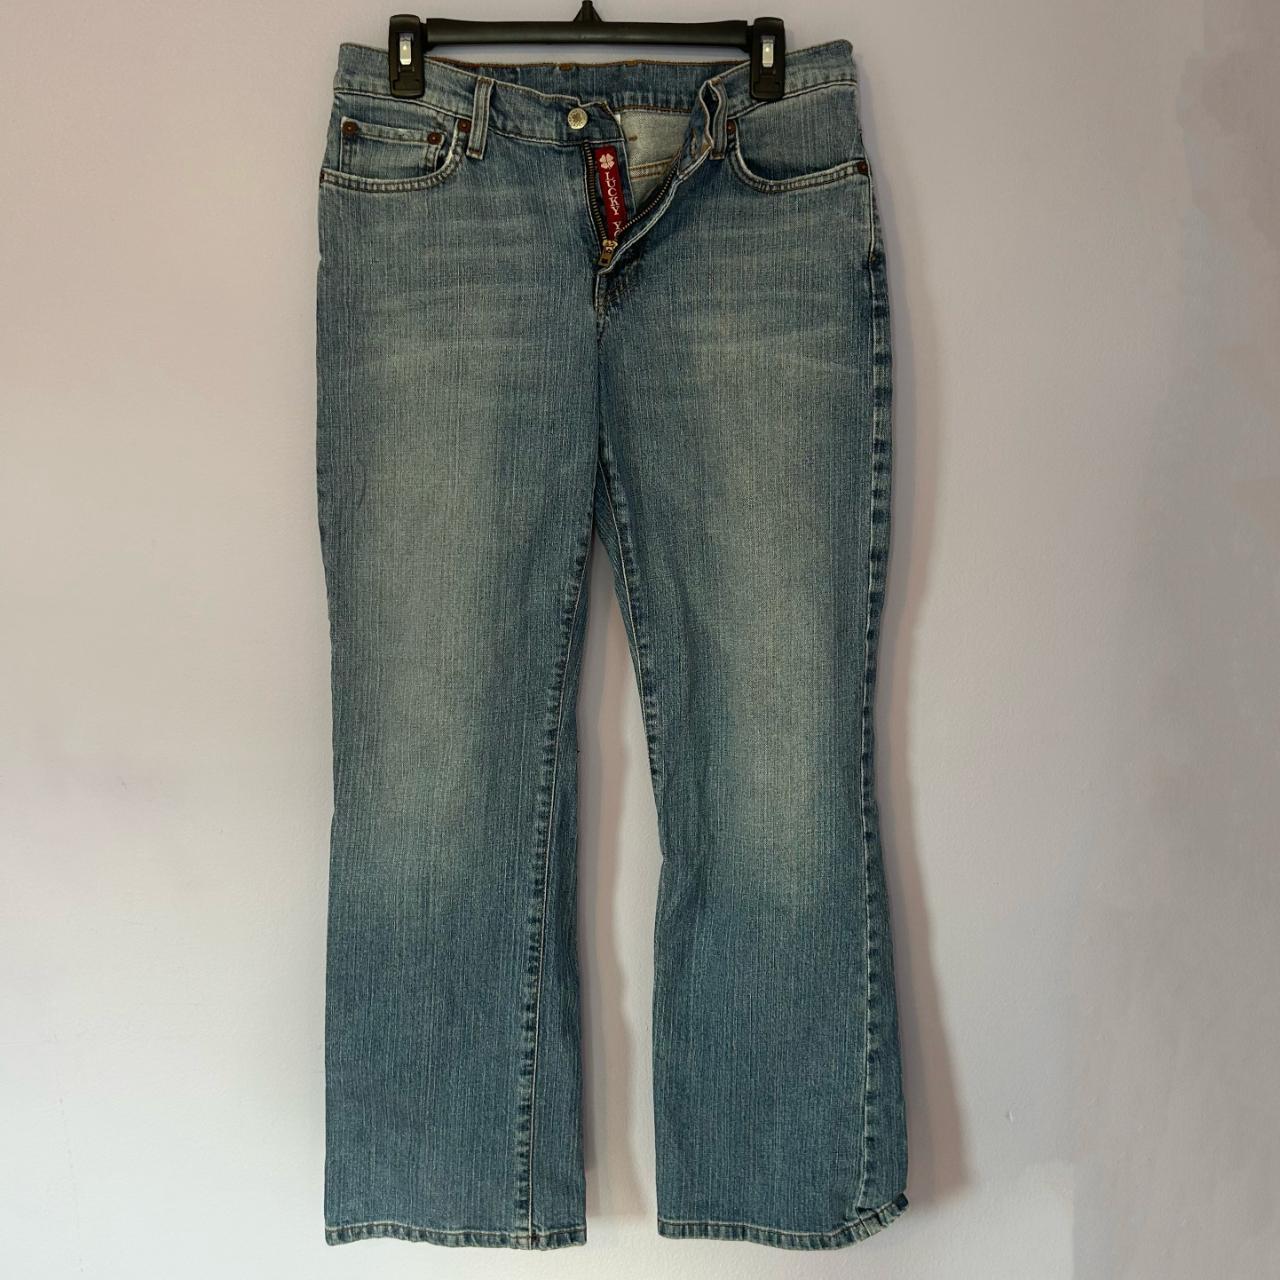 Y2K LUCKY BRAND DUNGAREES JEANS these are so - Depop